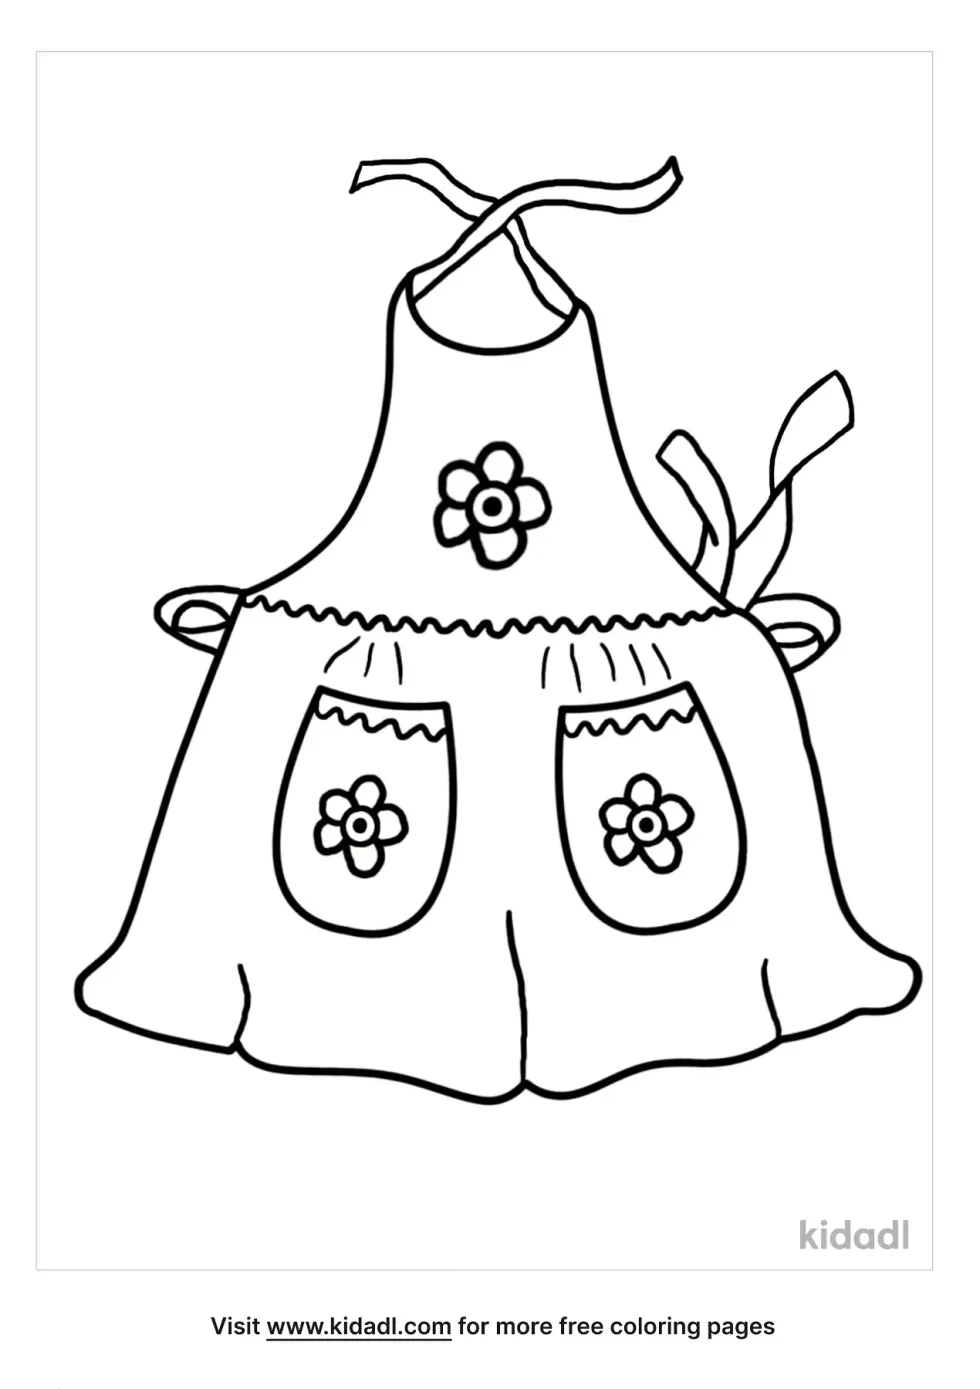 Apron Coloring Page